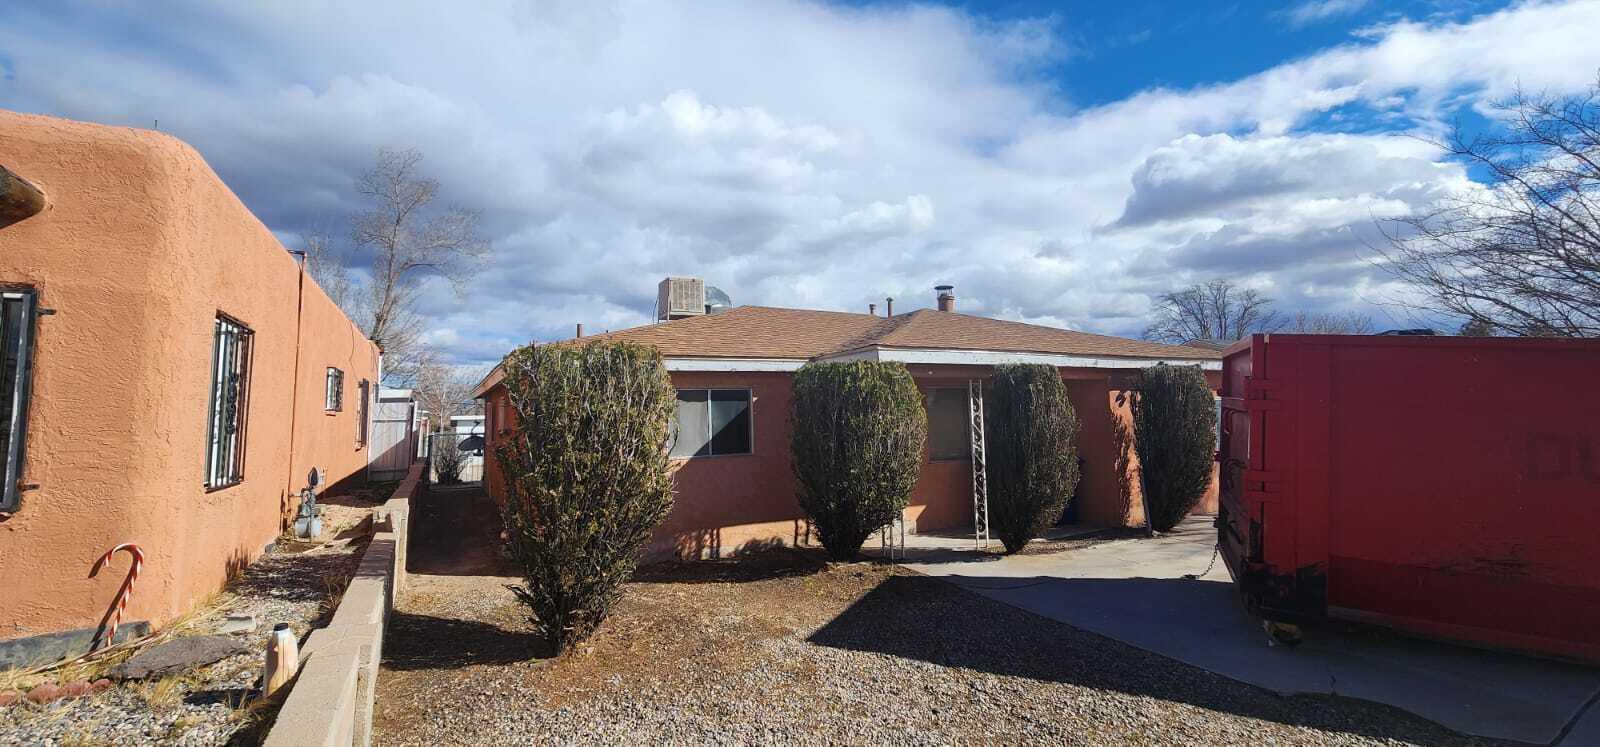 Southwest Heights Investment Opportunity- fix & flip or rehab & hold! Opportunity for sweat equity. Property needs significant work. Home is sold as is with all defects and faults (no pre-closing repairs or utility turn-ons will be completed).